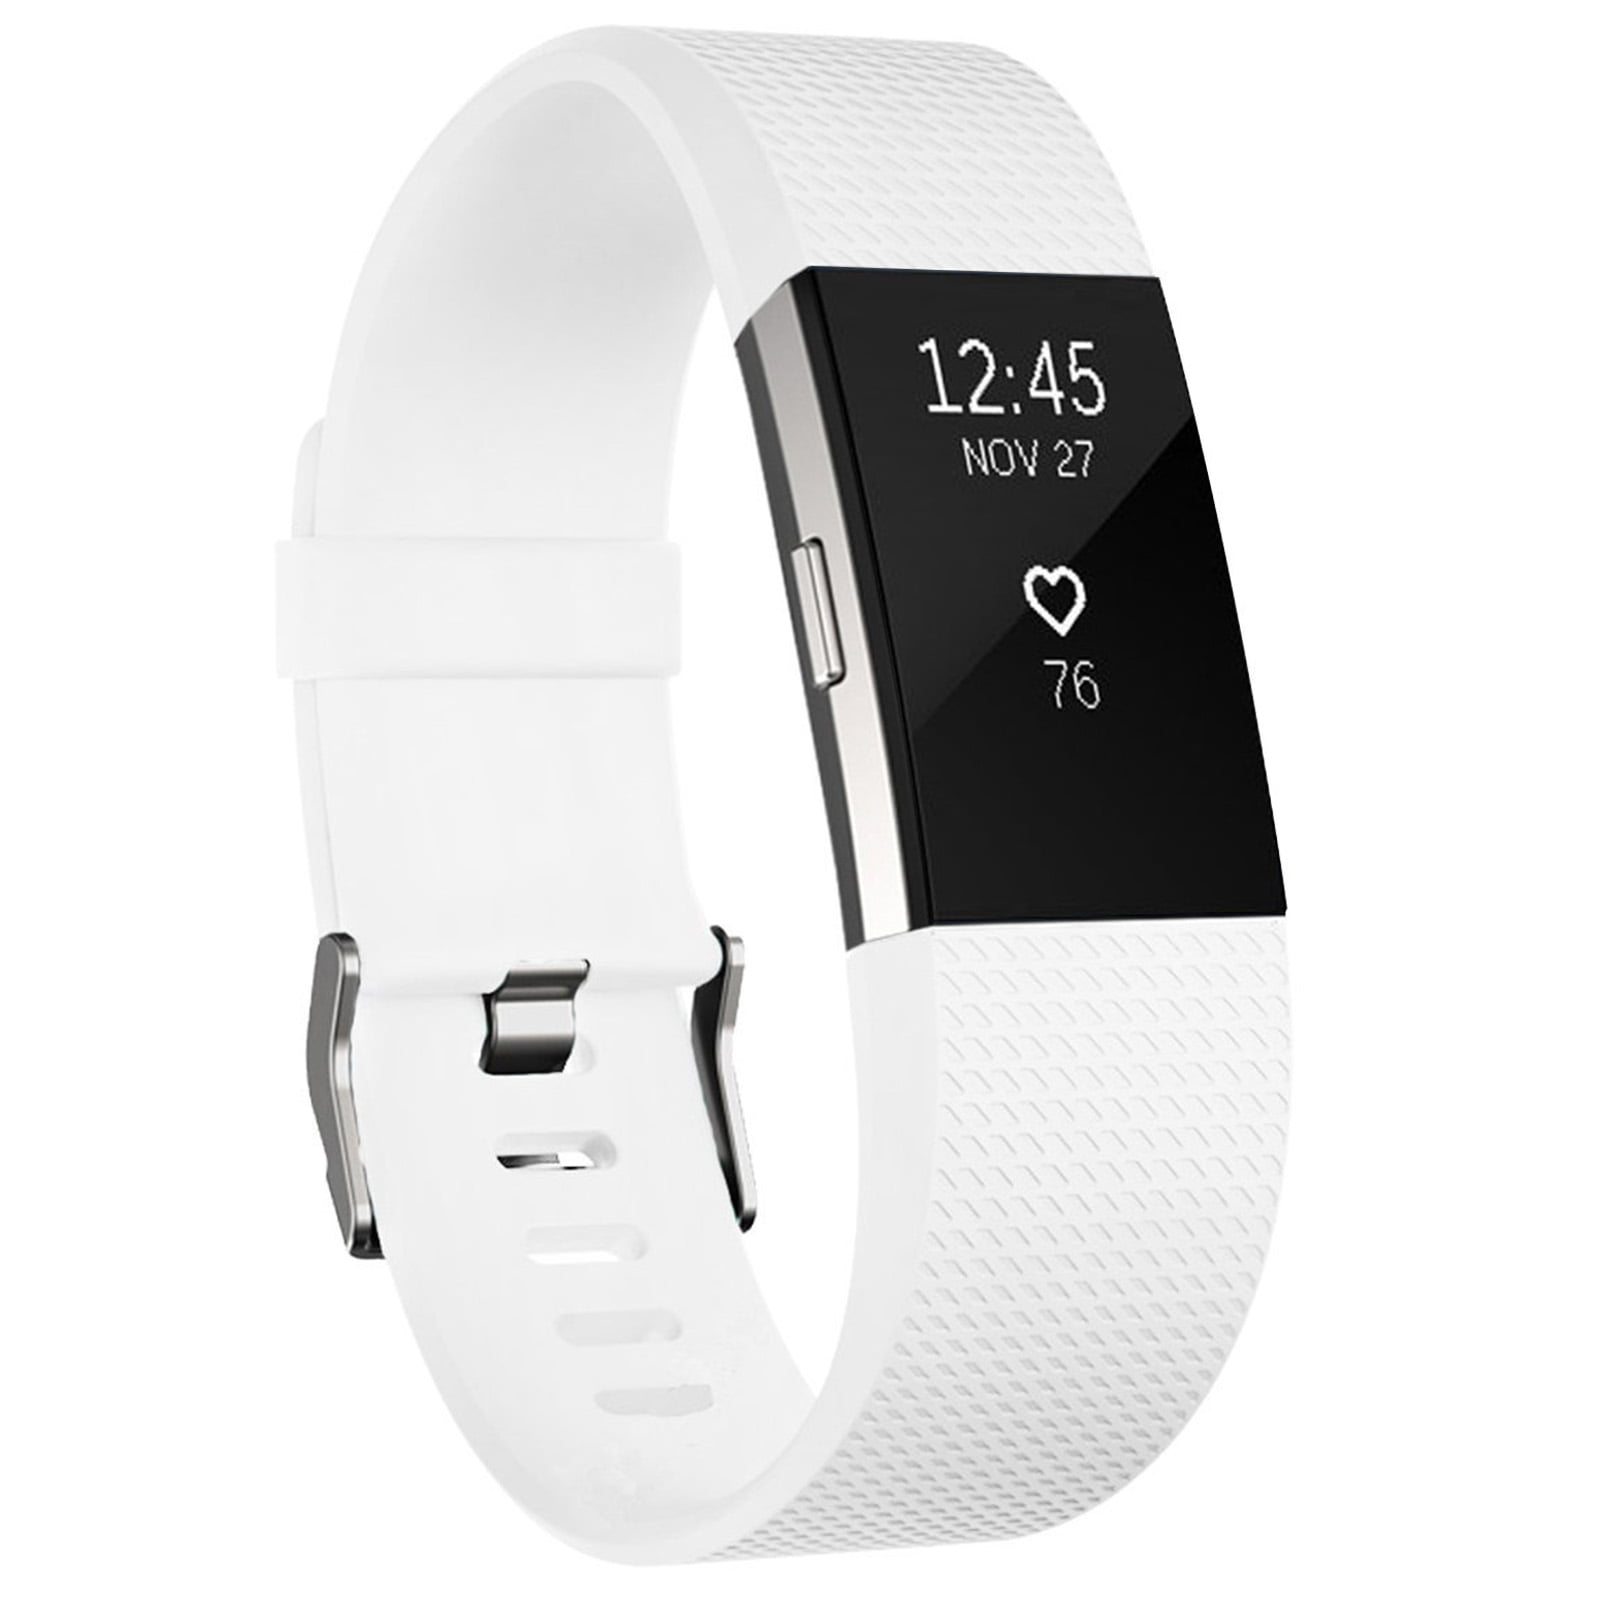 Fitbit Charge 2 Fitness-Armband Activity Tracker OLED Display Türkis Silber #796 